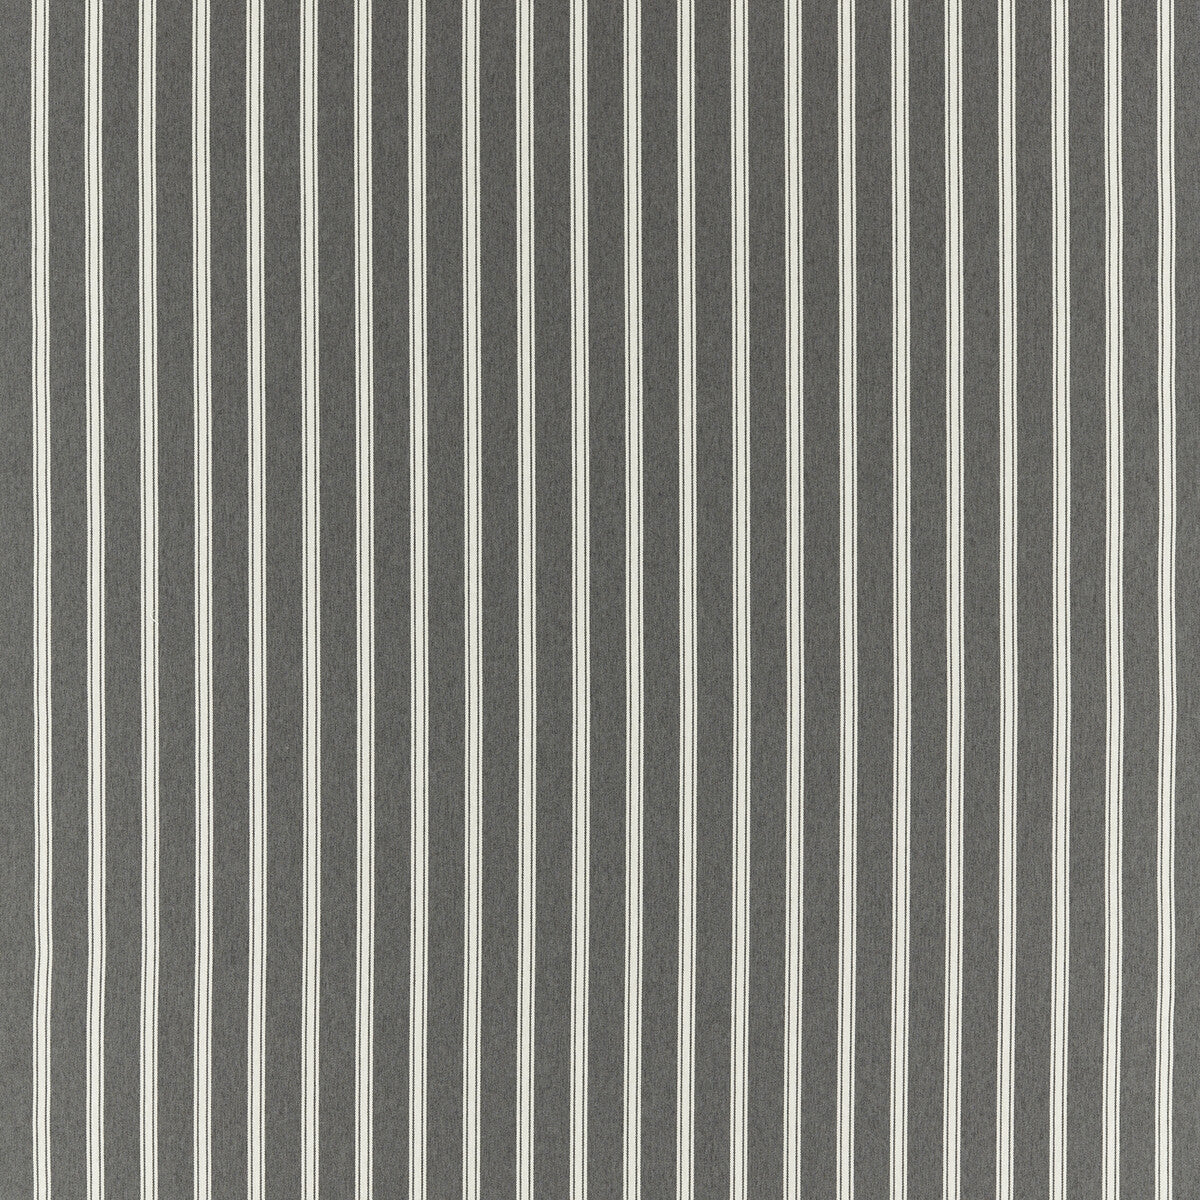 Anderson fabric in charcoal color - pattern F1567/01.CAC.0 - by Clarke And Clarke in the Clarke &amp; Clarke Burlington collection